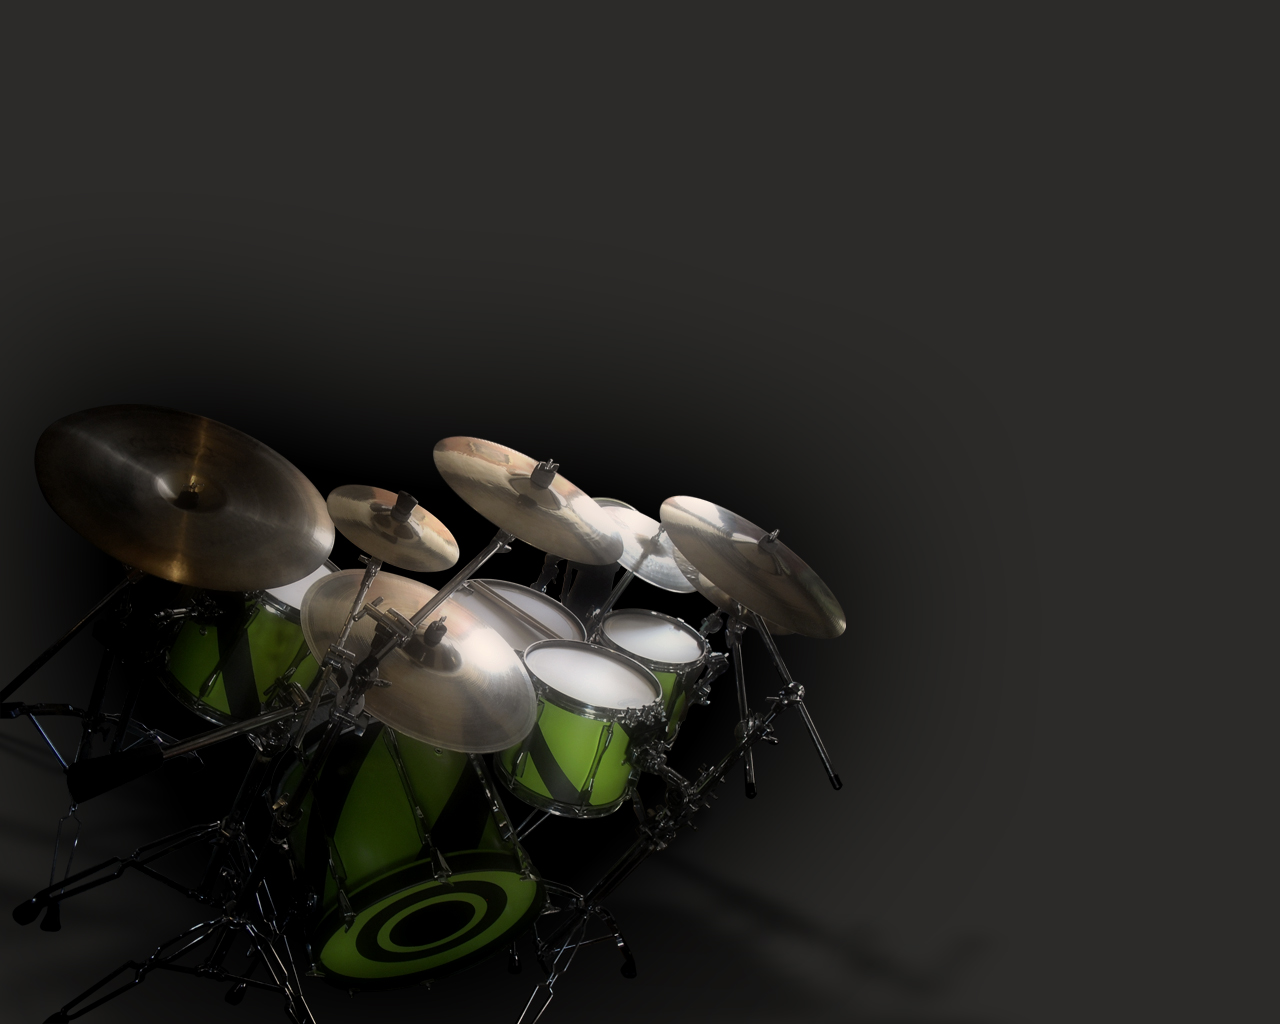 My Loud Drum Drummer Kit Photography